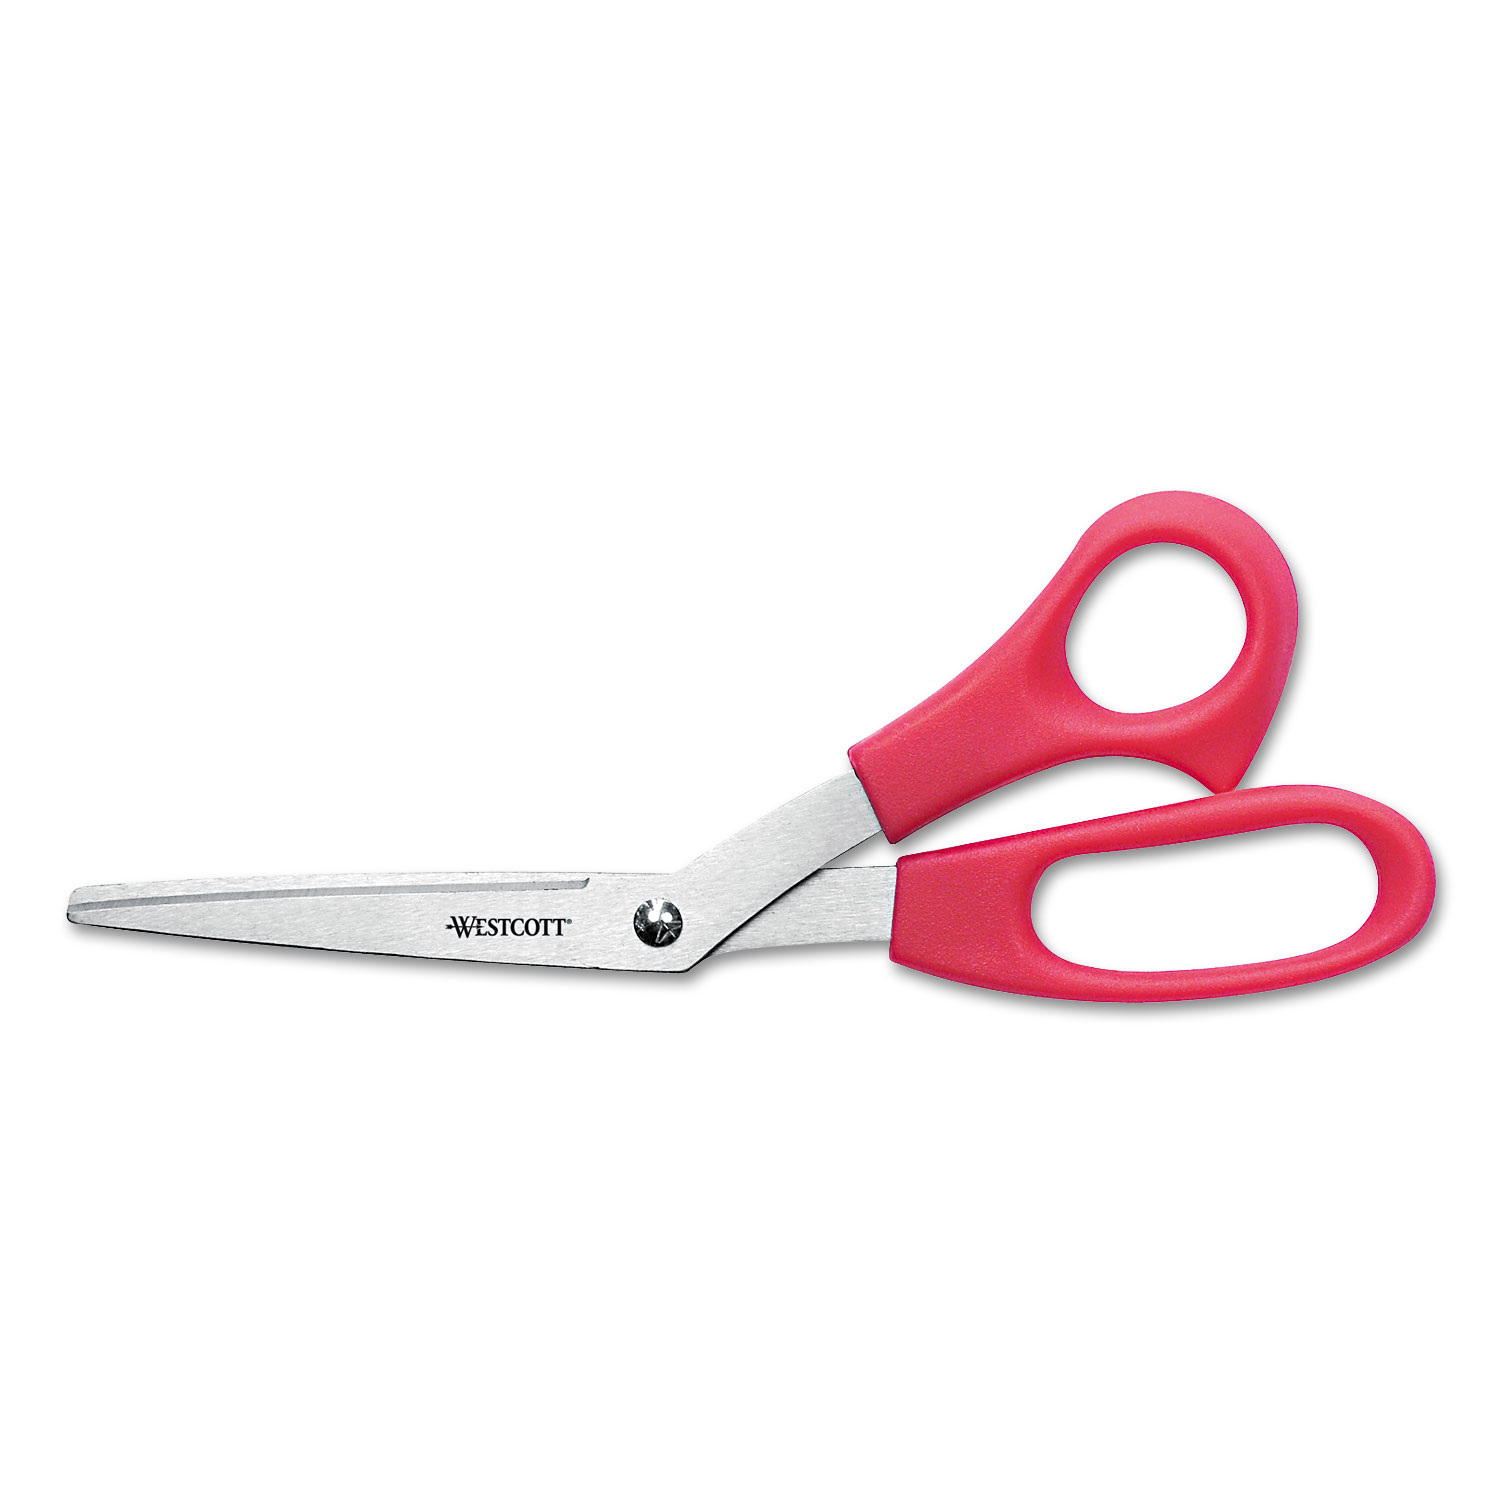  Westcott 10703 Value Line Stainless Steel Shears, 8 Long, 3.5 Cut Length, Red Offset Handle (ACM10703) 